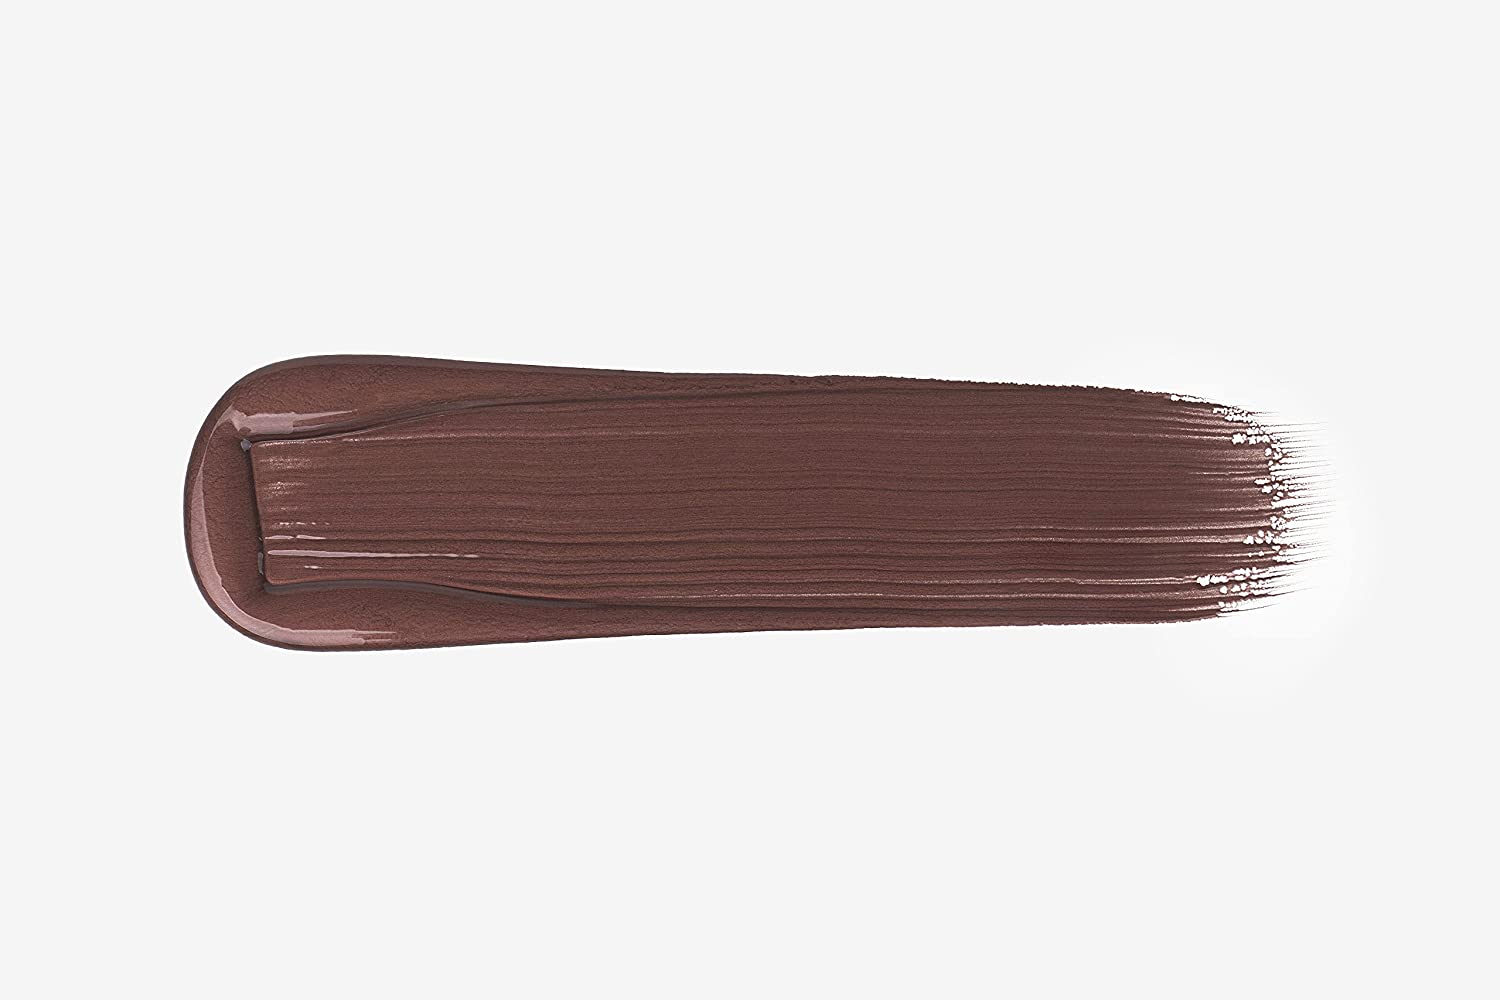 ButiPure Chocolate Brown One Day Hair Color (60g) Buti Pure